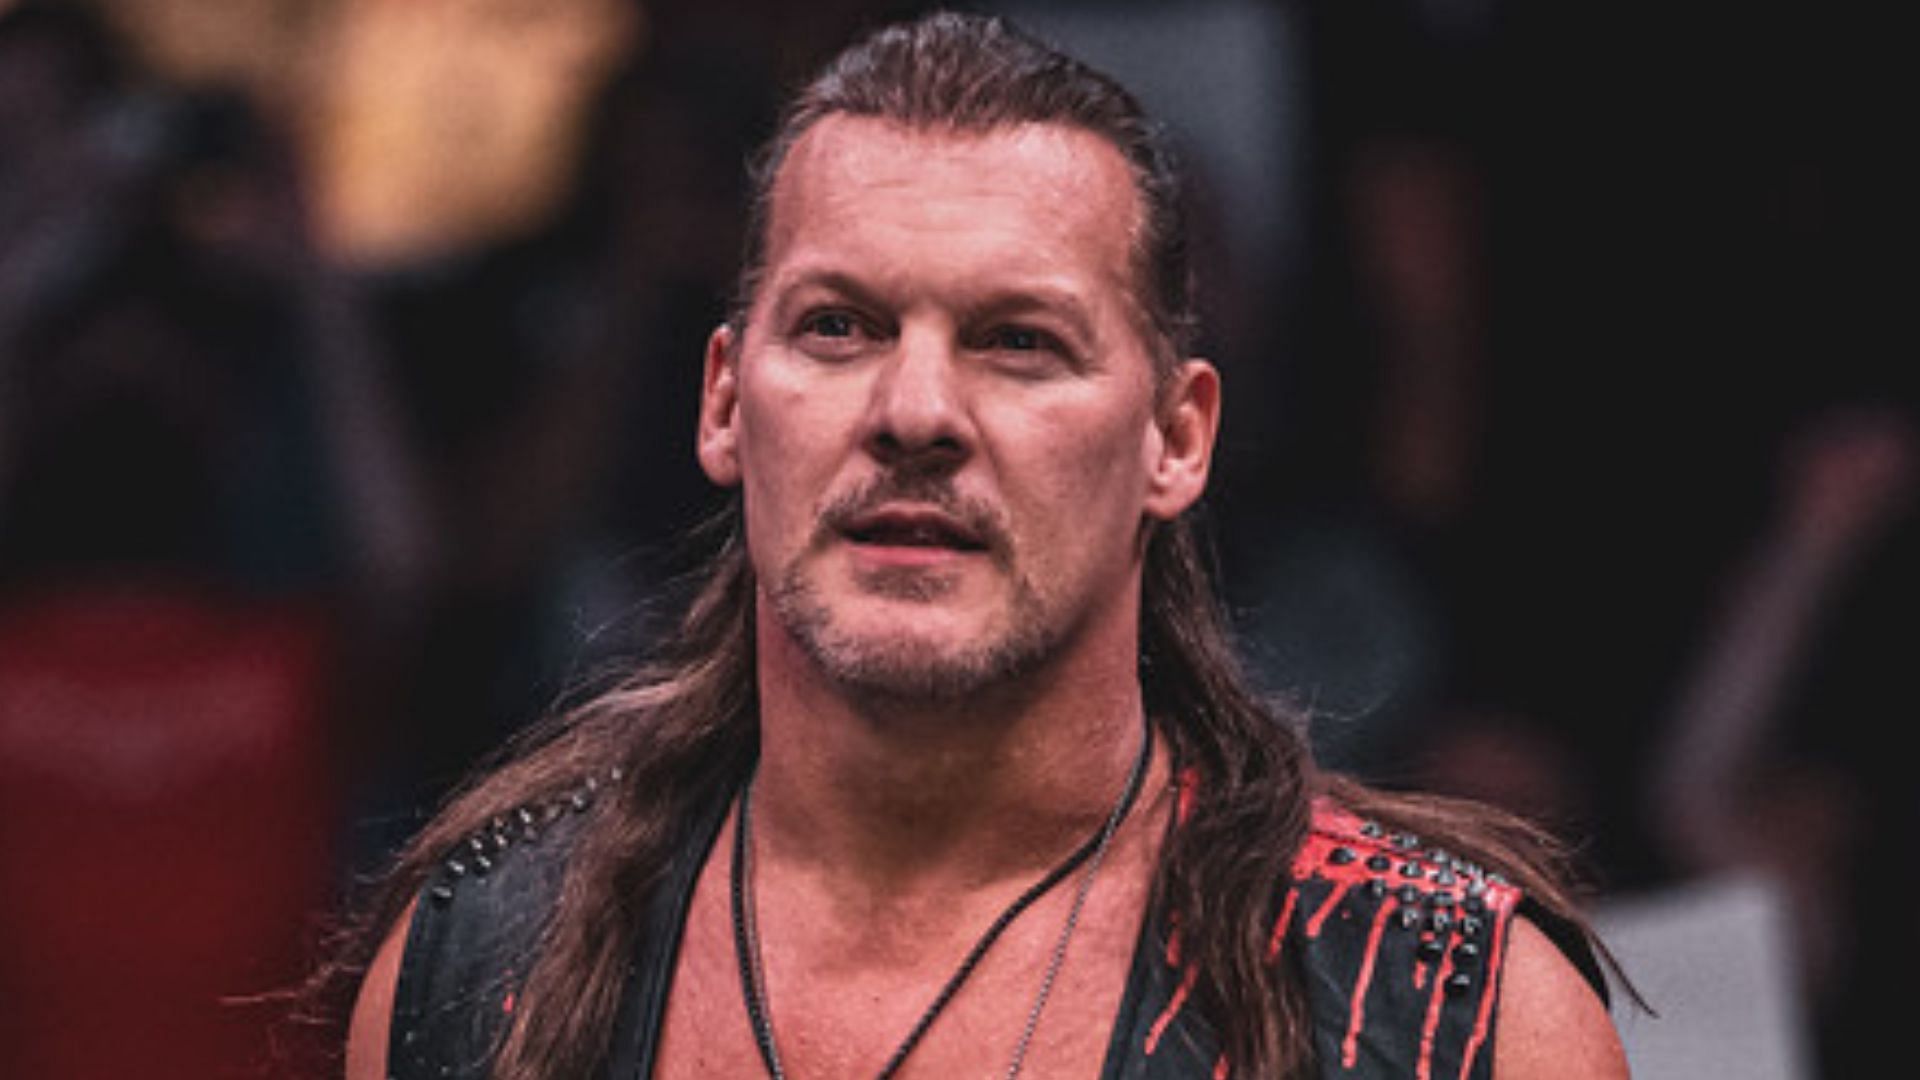 Could Chris Jericho be retiring from wrestling soon?